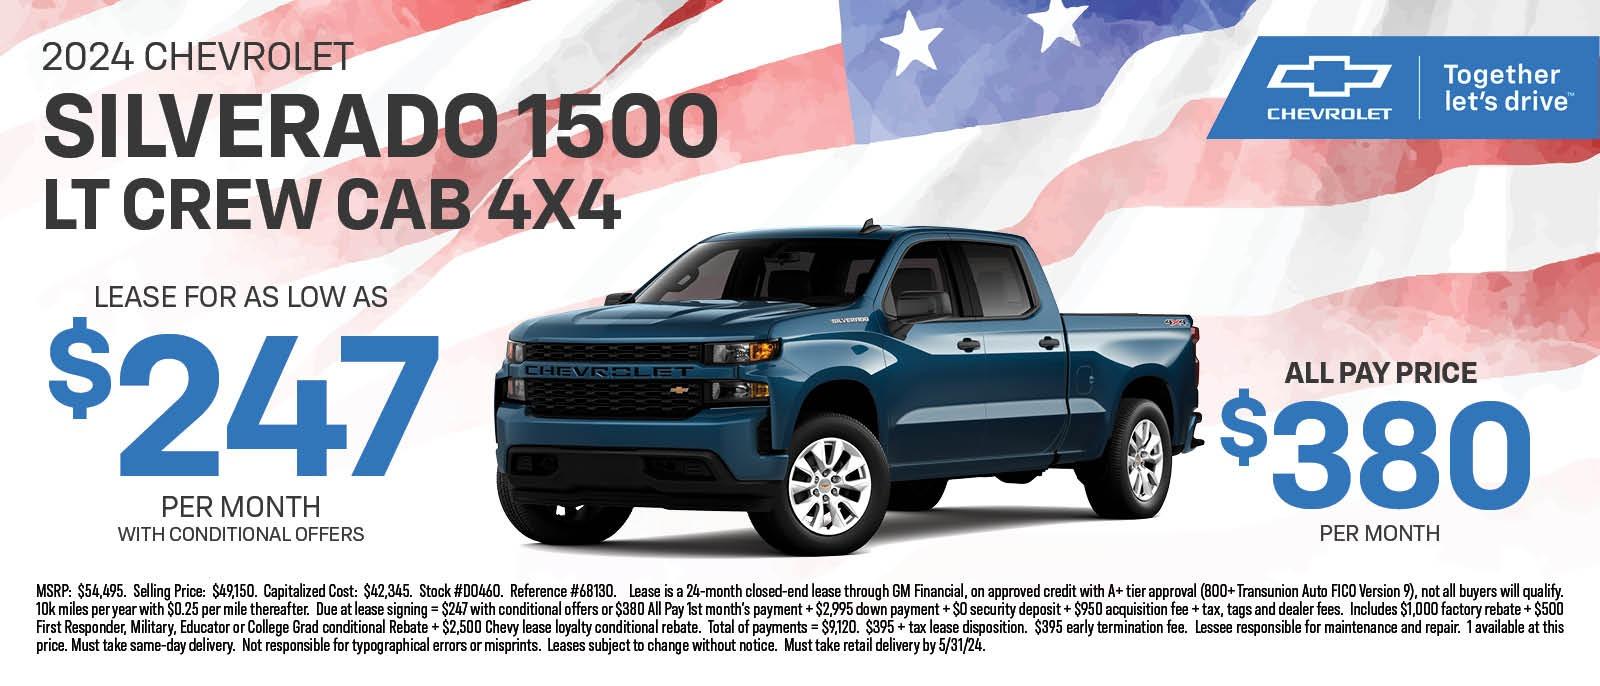 2024 CHEVROLET SILVERADO 1500 LT CREW CAB 4X4 LEASE FOR AS LOW AS $247 PER MONTH WITH CONDITIONAL OFFERS CHEVROLET ל CHEVROLET Together let's drive ALL PAY PRICE $380 PER MONTH